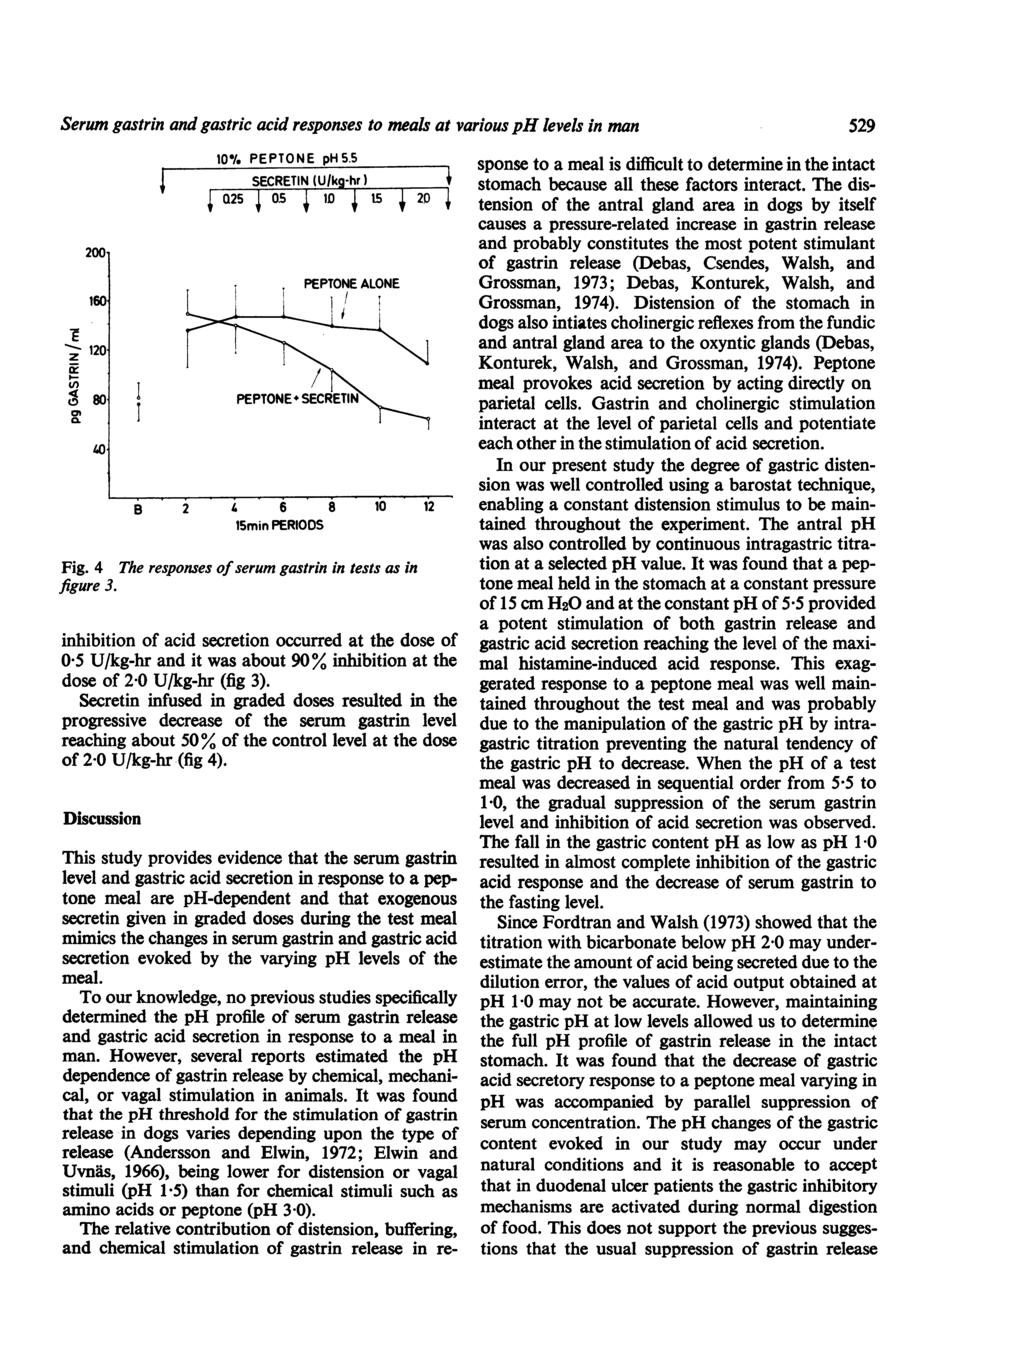 Serum gastrin and gastric acid responses to meals at various ph levels in man - z 0, 2001 160 120 80 Fig. 4 10% PPTON ph 5.